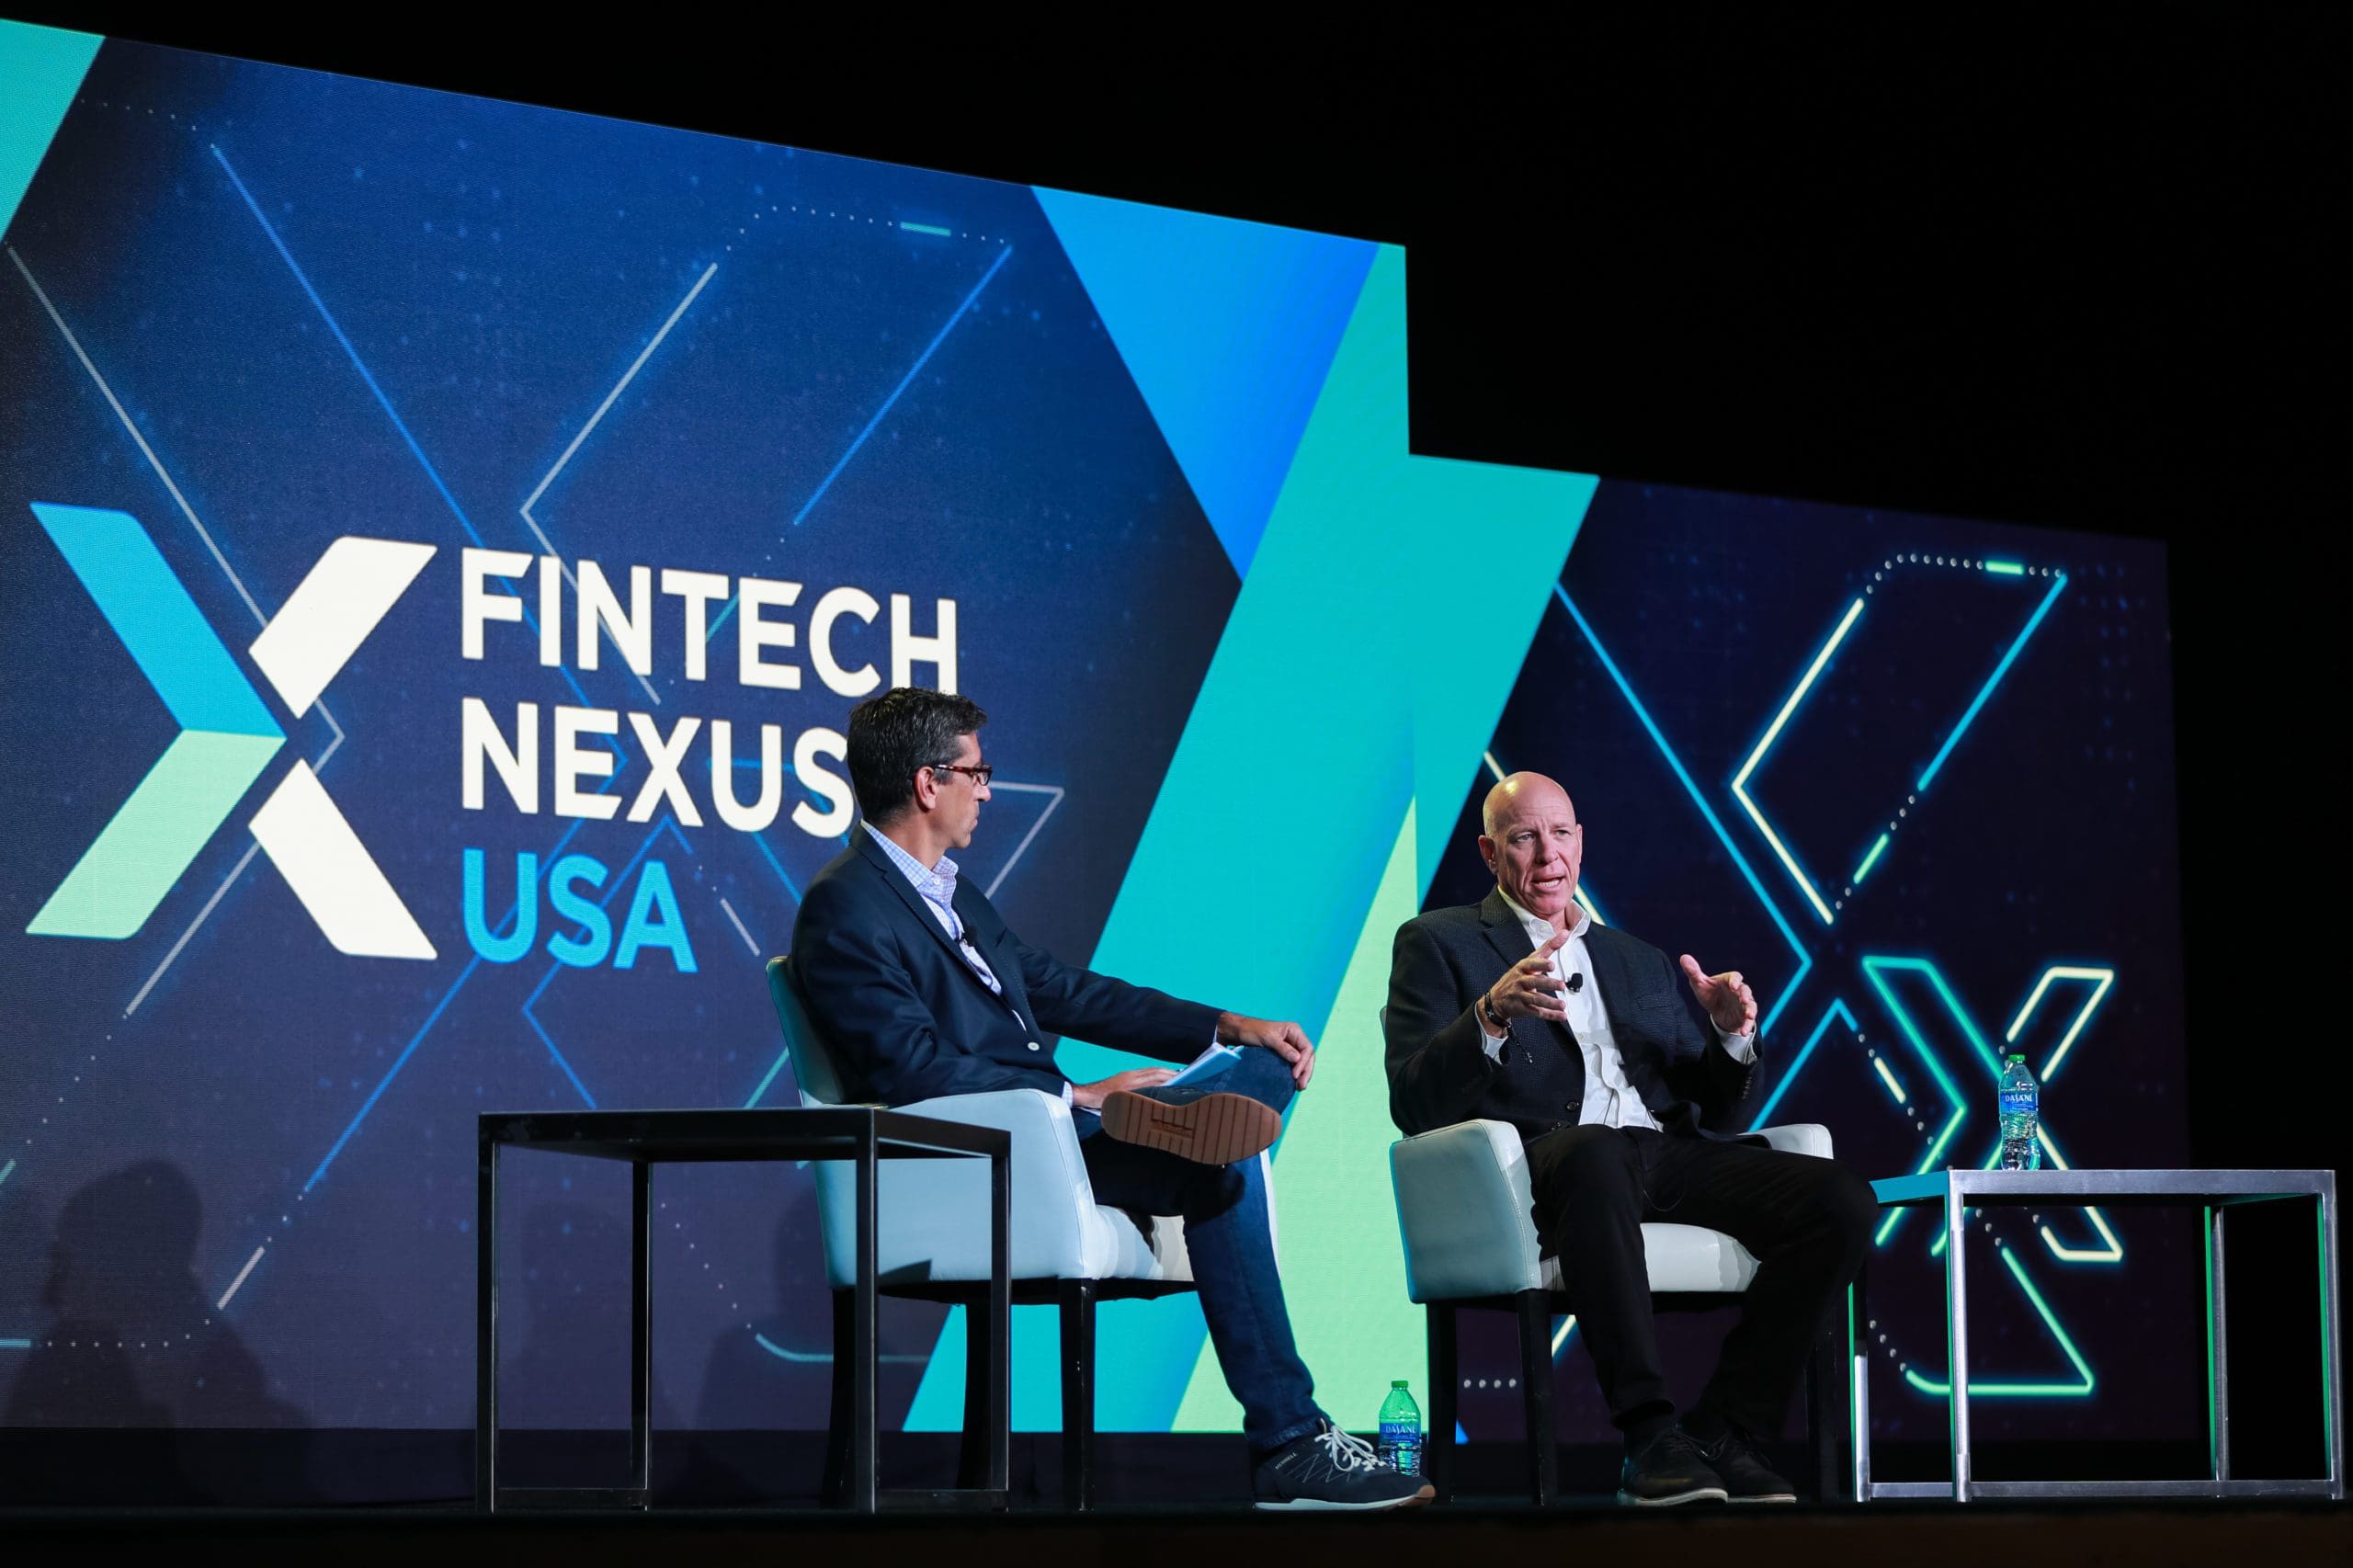 Discussing stablecoins and the response of banks at Fintech nexus 2022